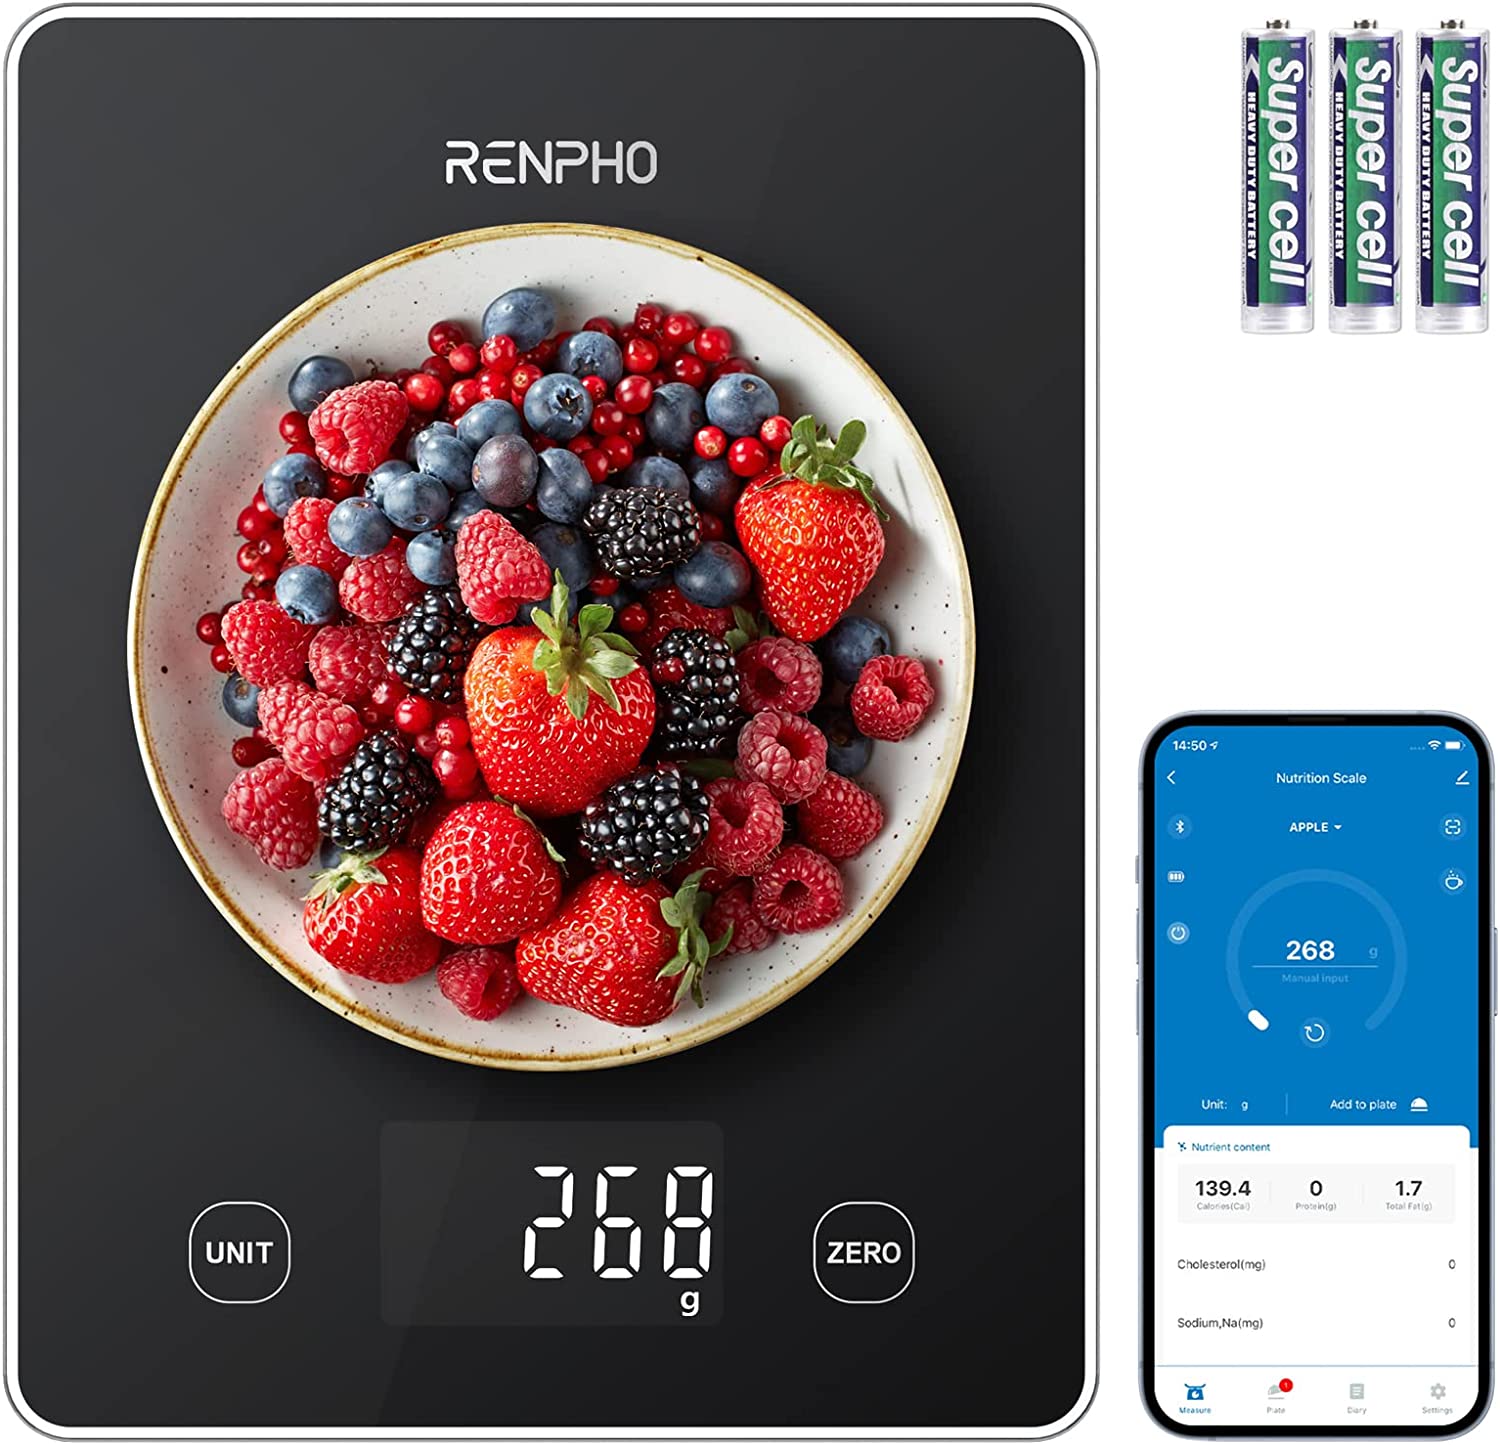  Nicewell Food Scale, High Accurate Digital Kitchen Scale with  Pastry Mat, Scale Measures in Grams and Ounces 6kg 13lbs Max, with Premium  Stainless Steel Platform and Large Backlit Display: Home 